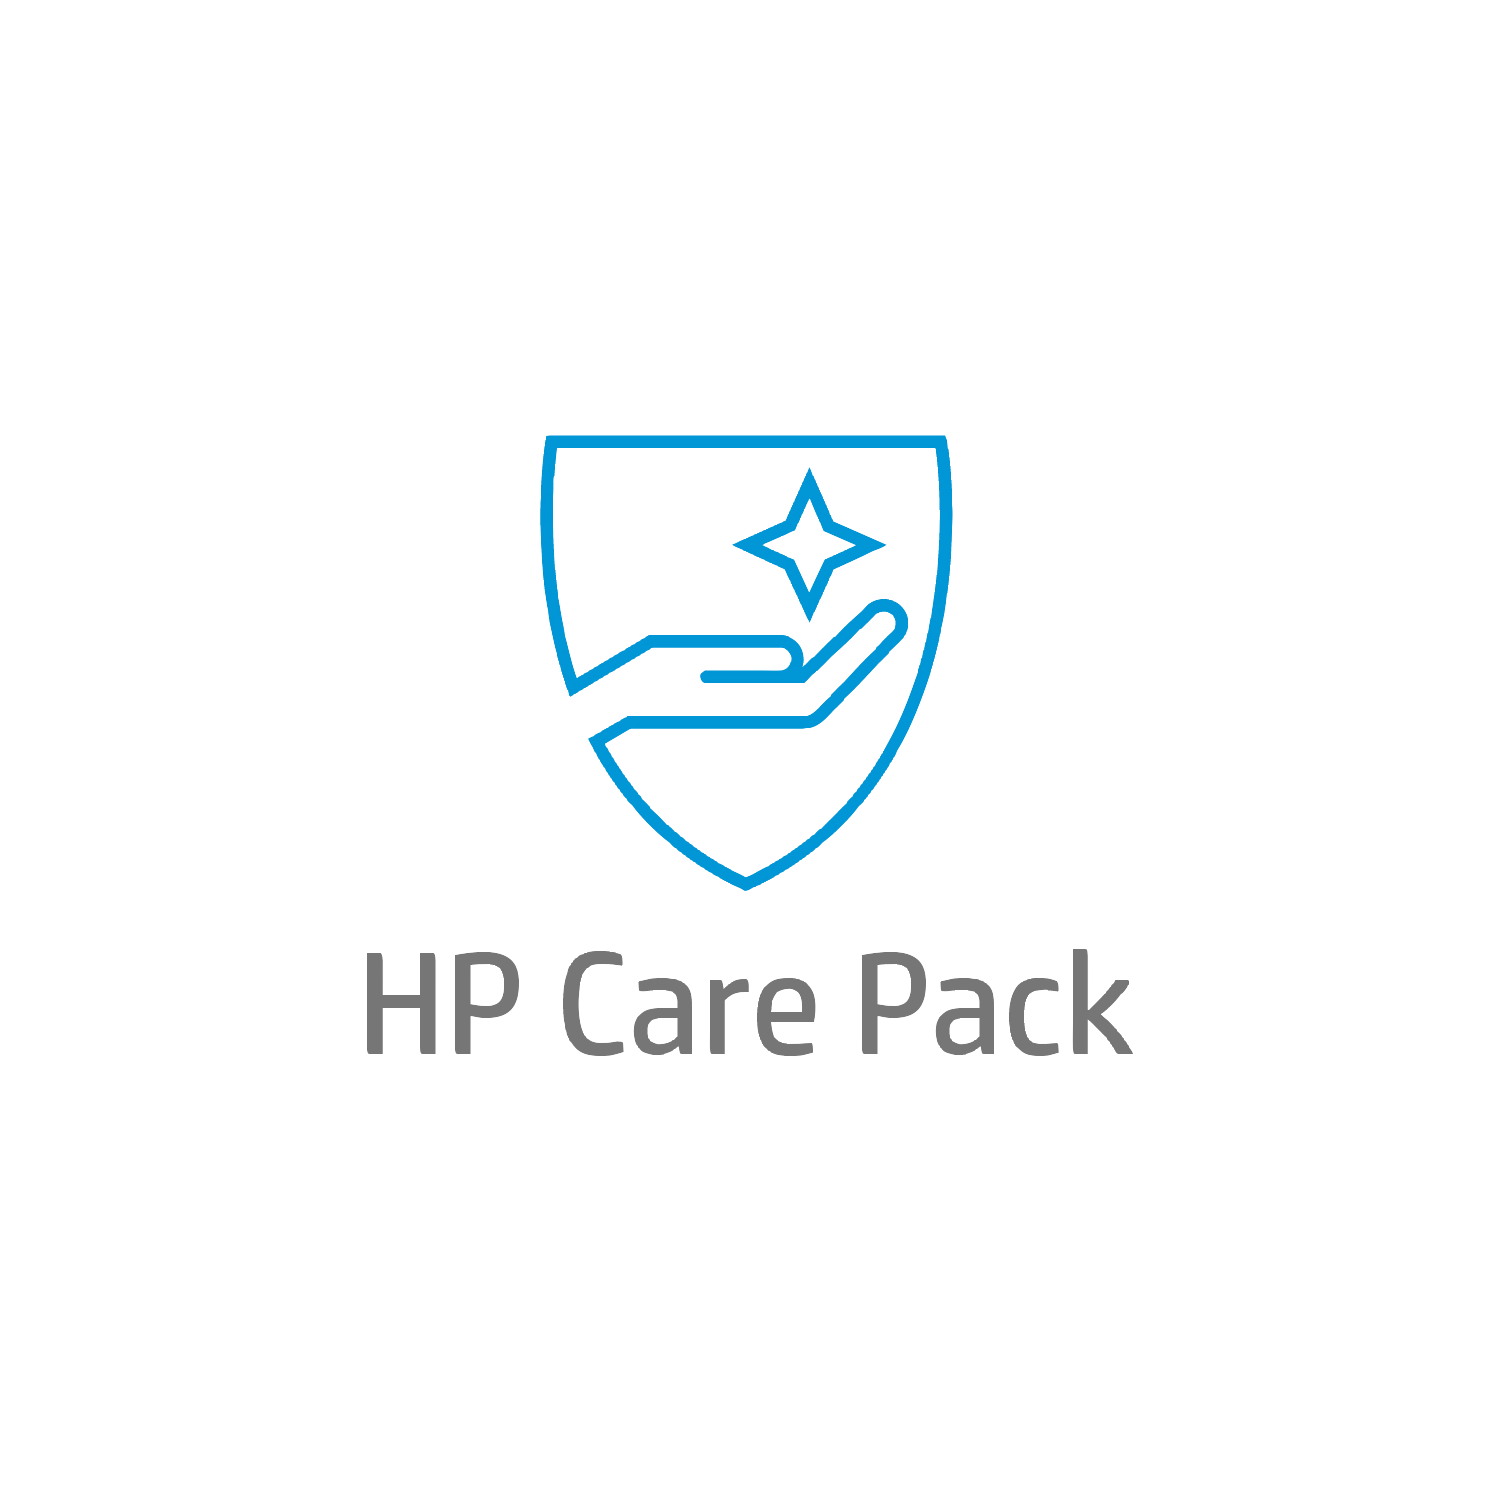 HP Inc Electronic HP Care Pack Software Technical Support - Technischer Support - für HP Capture and Route Fax - 4 Ports - ESD - Telefonberatung - 3 Jahre - 9x5 (UA0P4E) von HP Inc